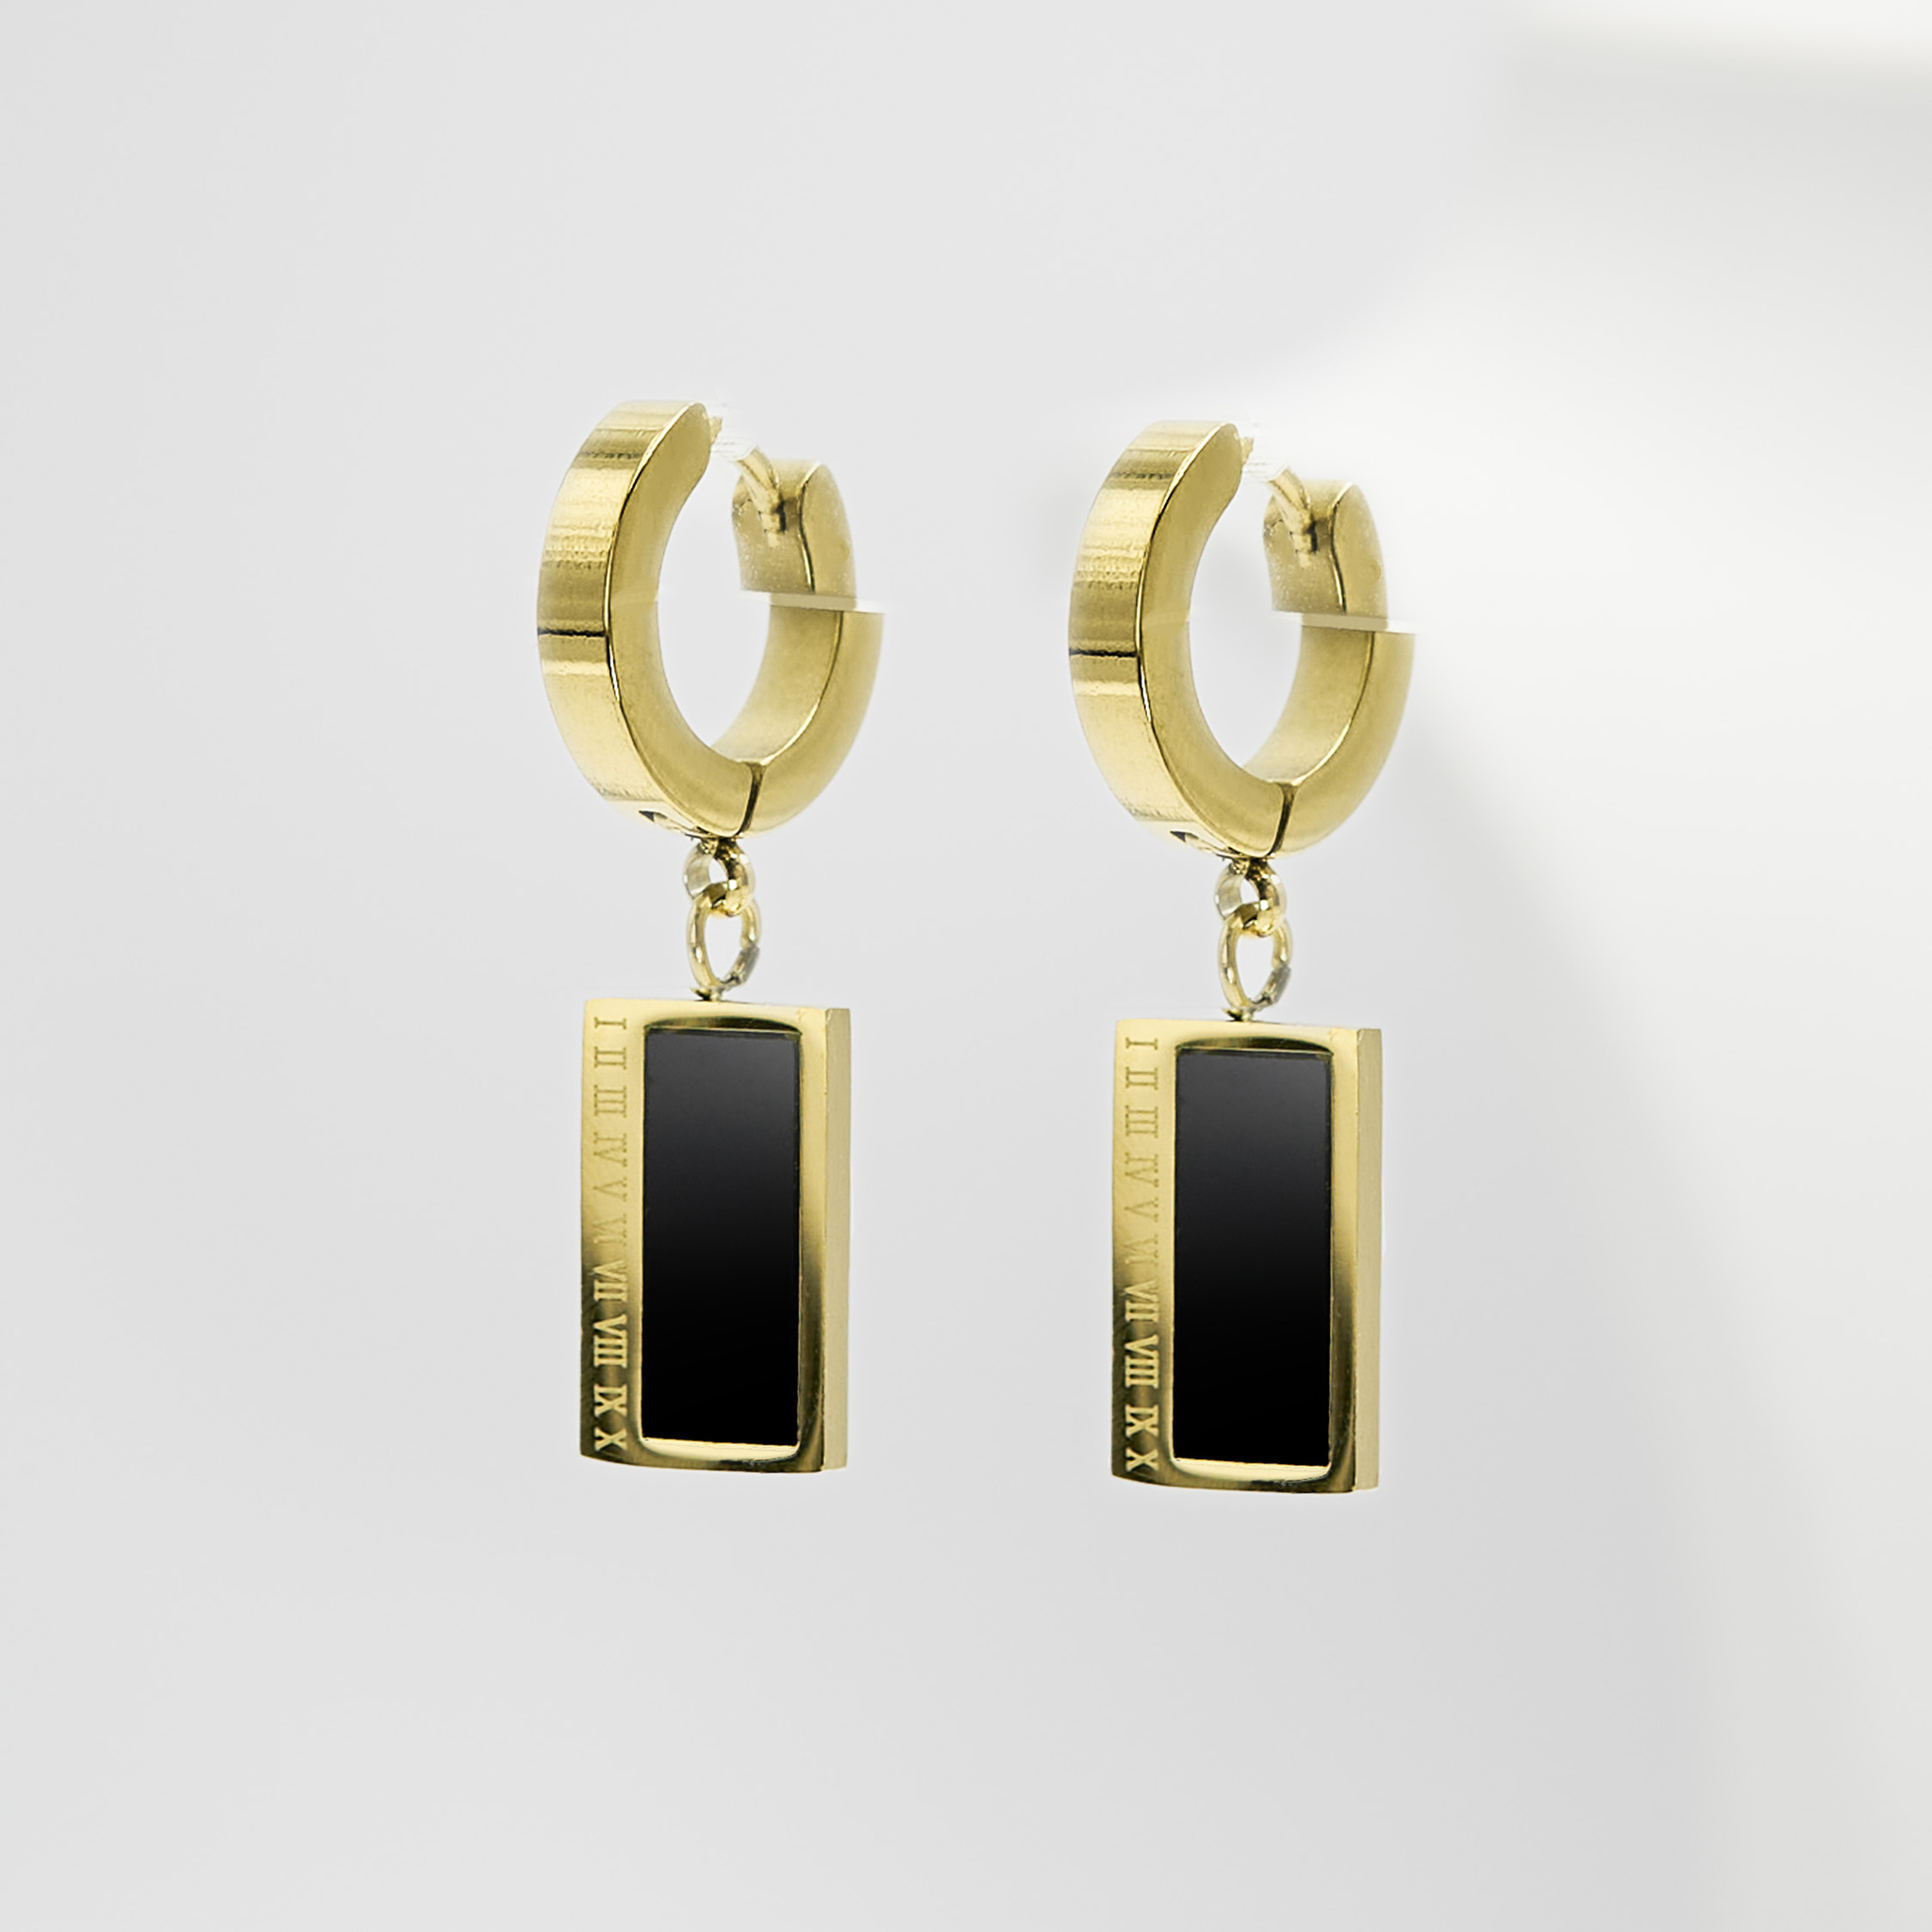 1- Era Black Marble Gold Edition -Örhänge 316 L - Special Earrings From SWEVALI